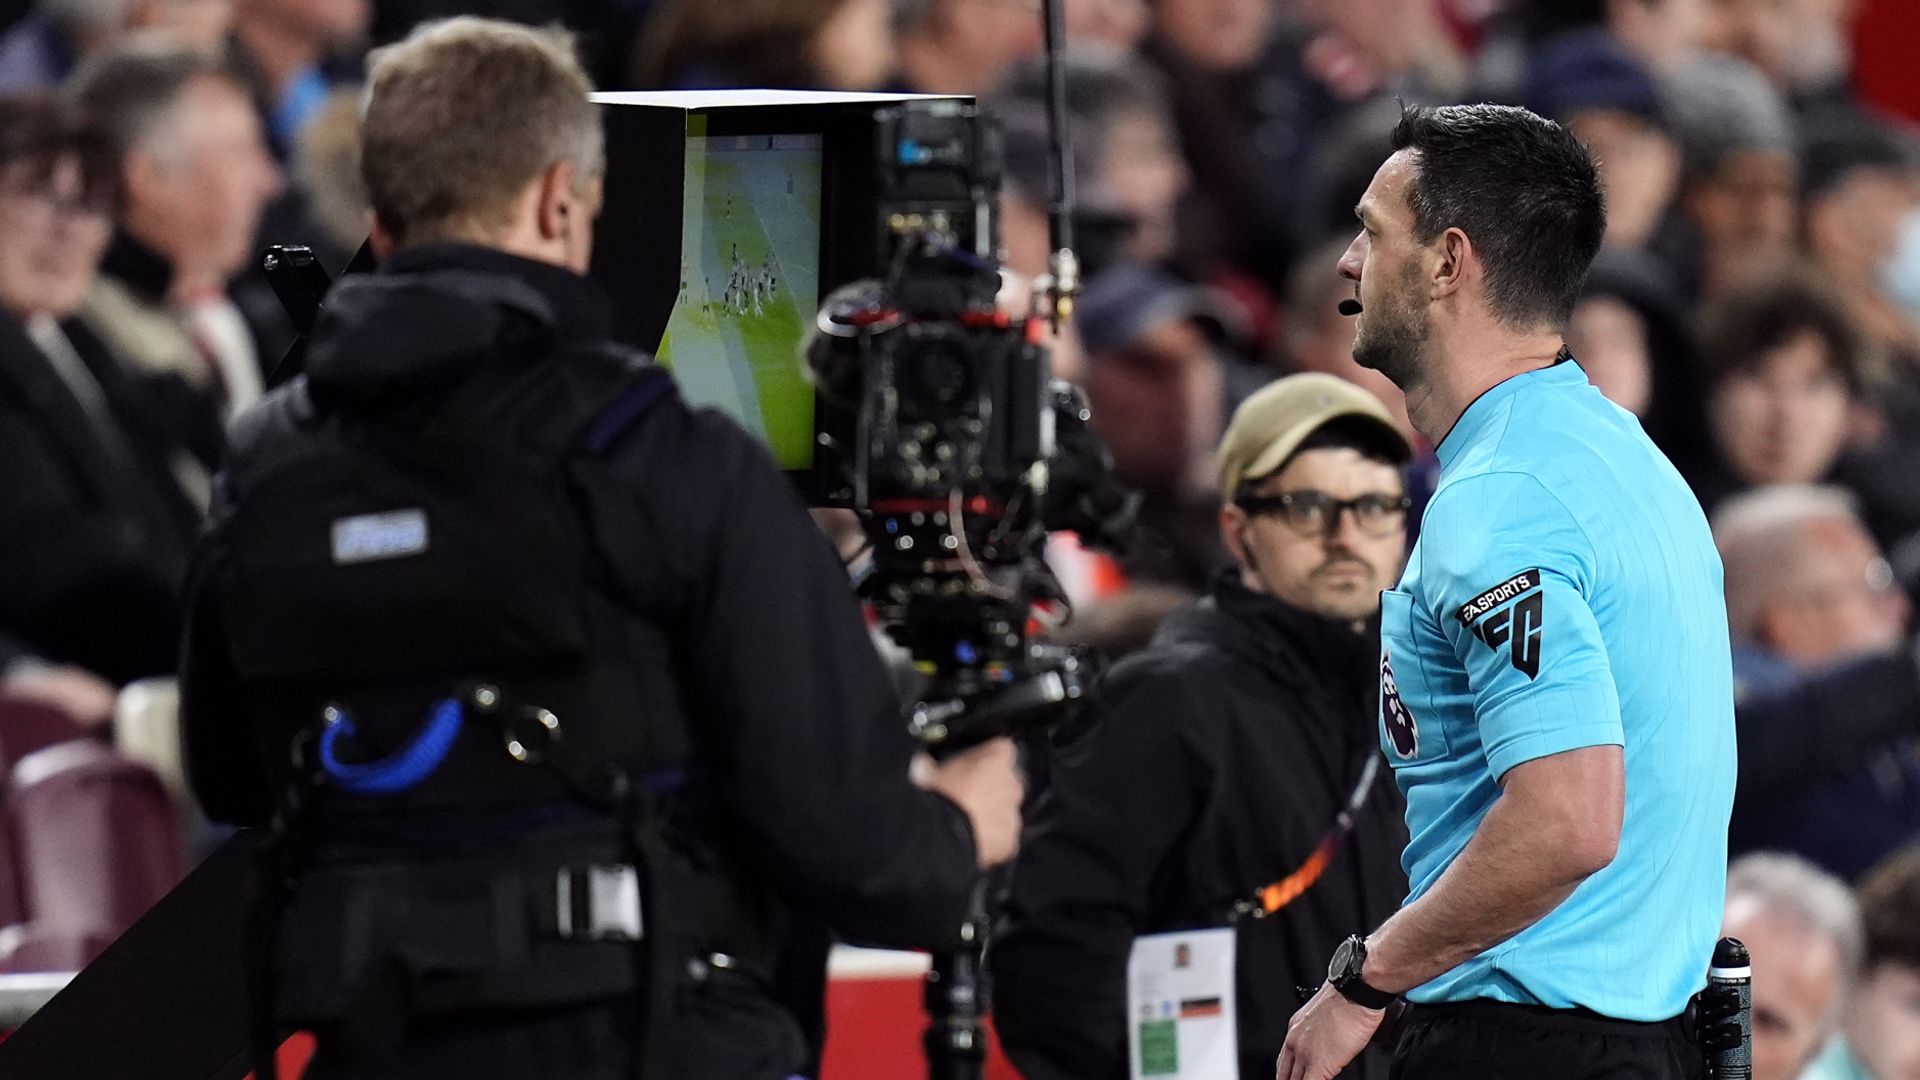 Wolves unlikely to win vote but adamant VAR is damaging football